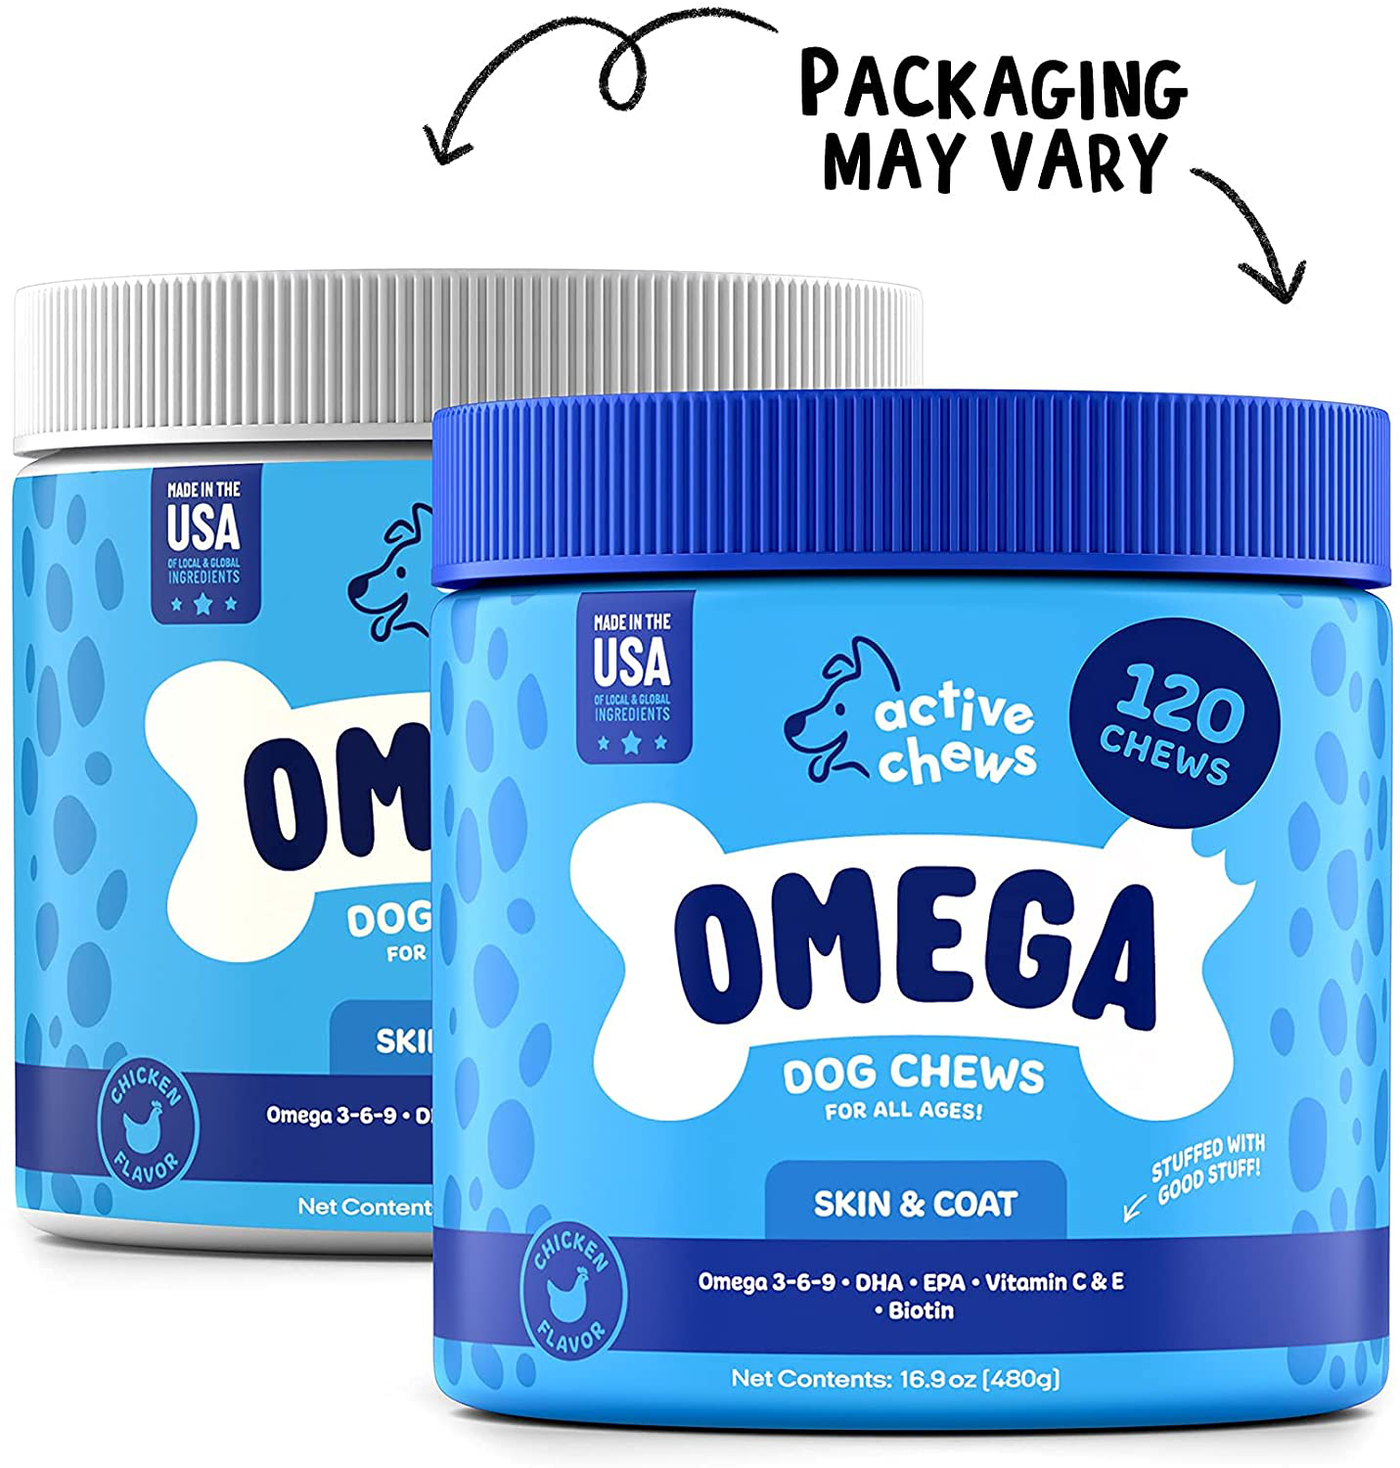 Active Chews Omega 3 Fish Oil for Dogs | Dog Supplement with DHA & EPA Omega 3 6 9, Vitamin B & E and Biotin | Promotes Dog Itch Relief, Joint Support and Heart & Brain Health